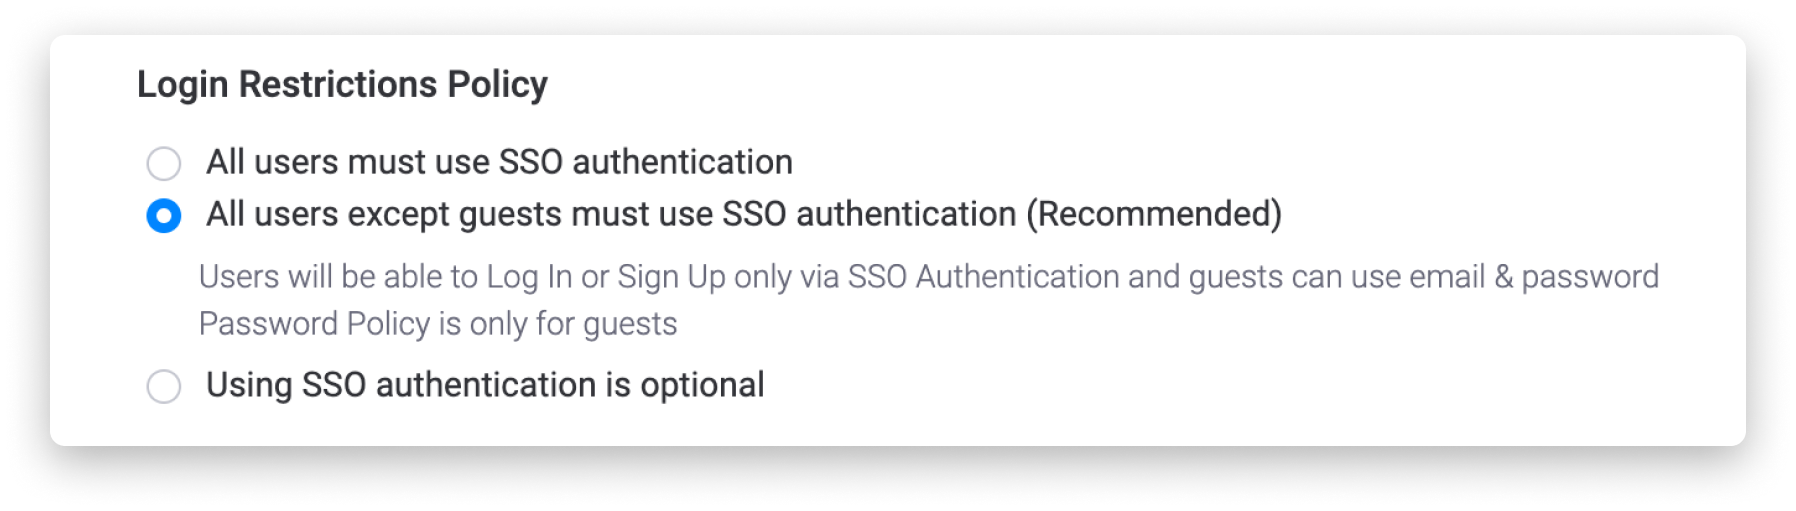 SAML Single Sign-On (SSO) using Monday.com (SP) - Select Login Restriction Policy